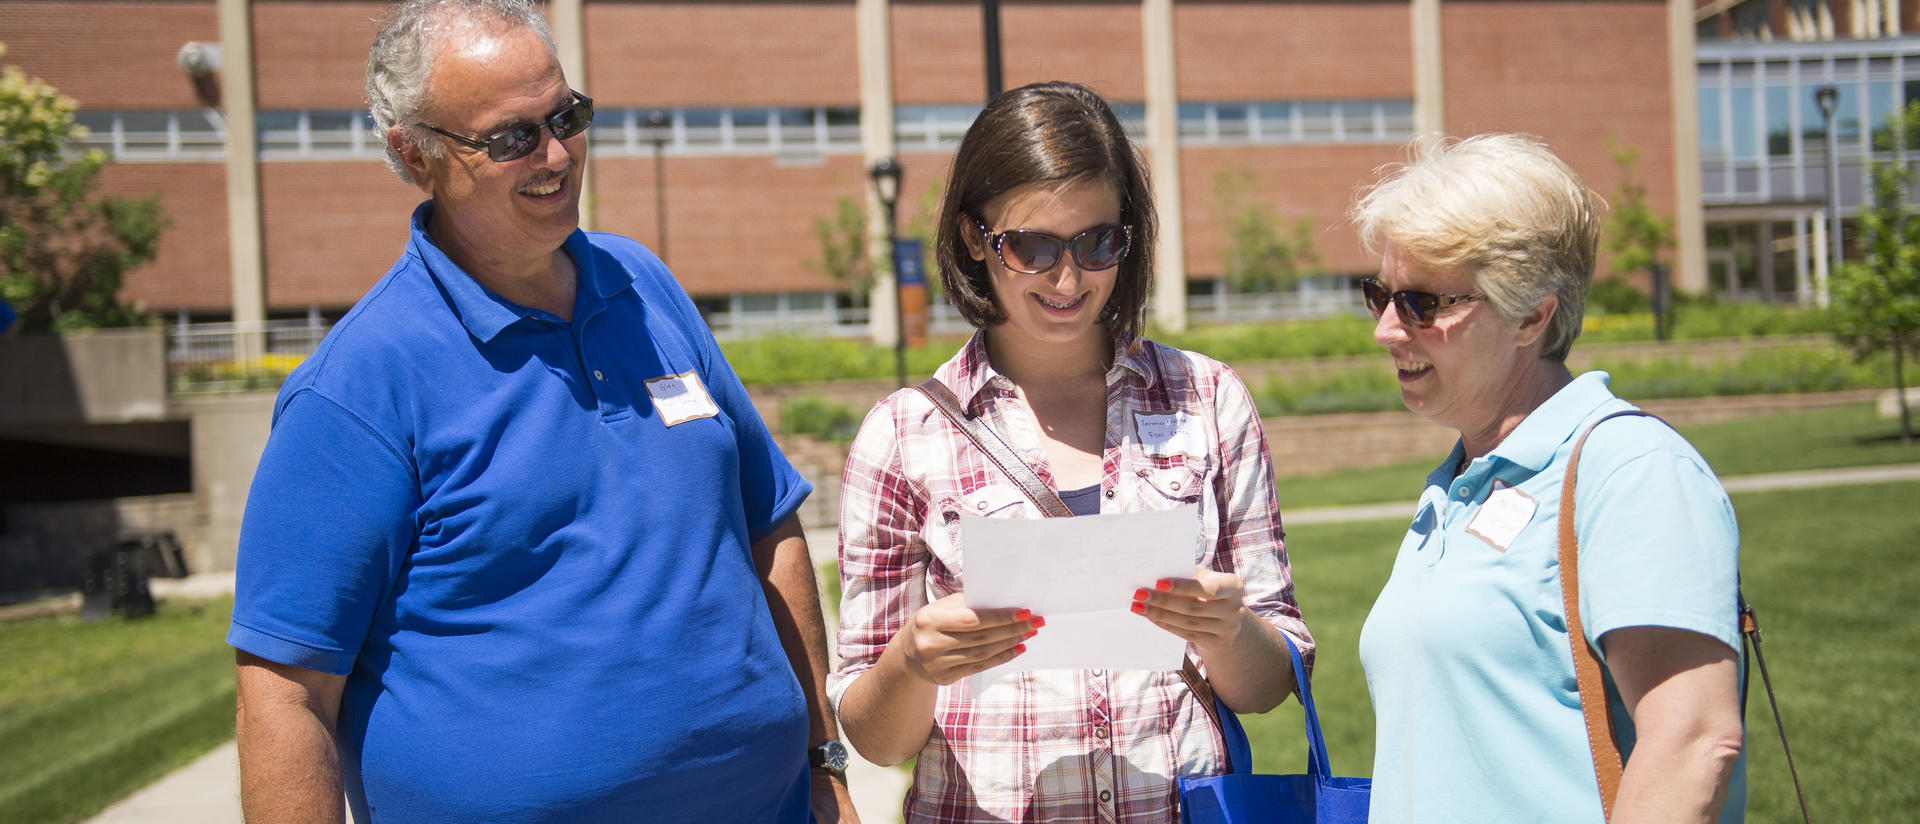 Parents and student on cmapus for orientation, outside on campus mall. 